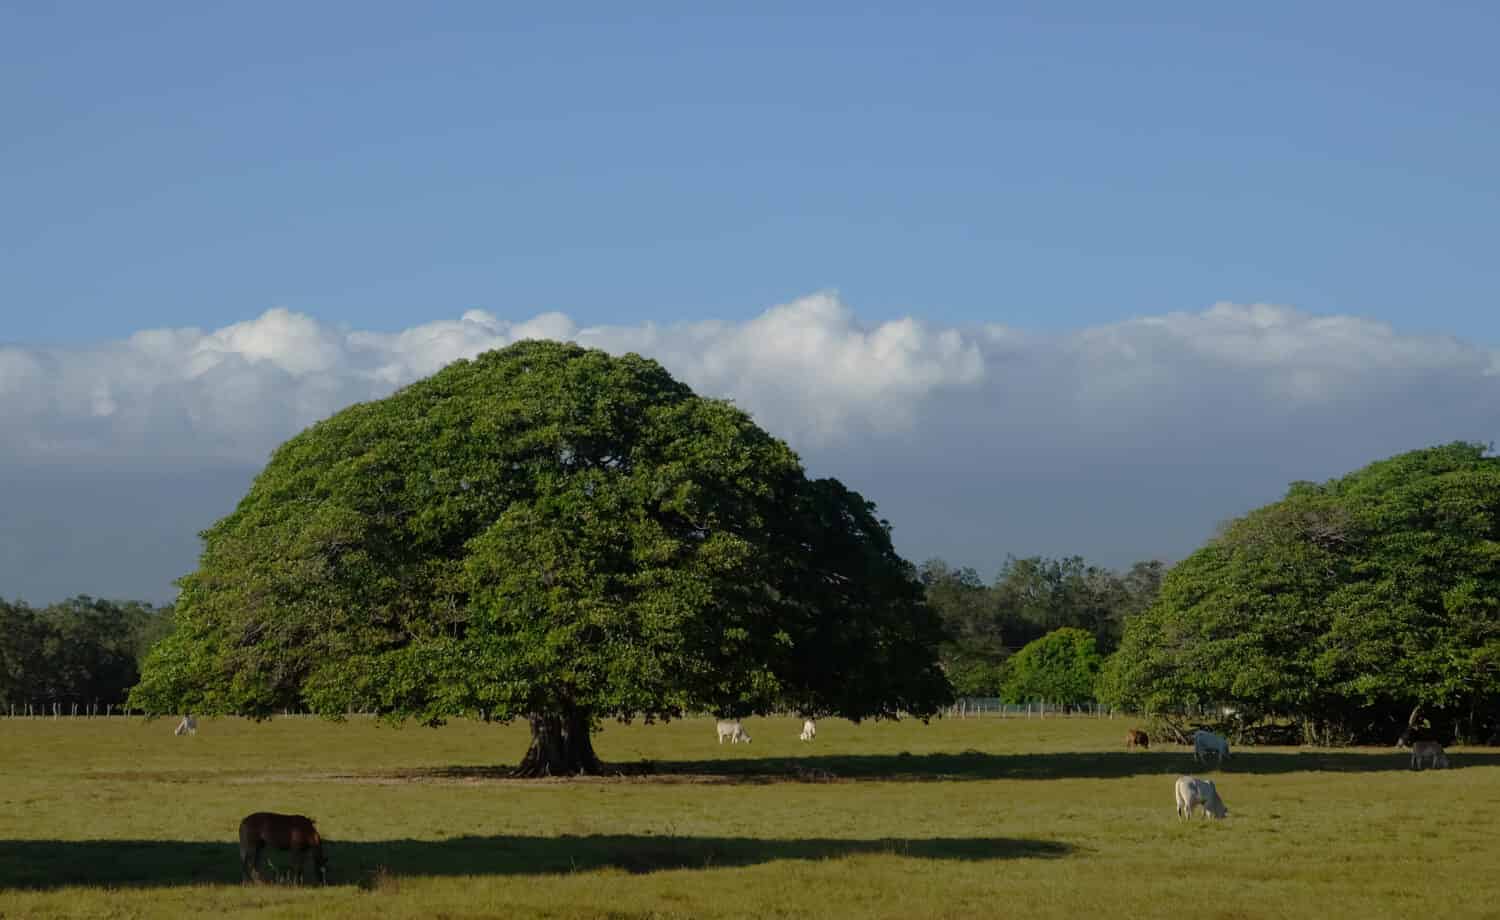 Elephant tree and cattle